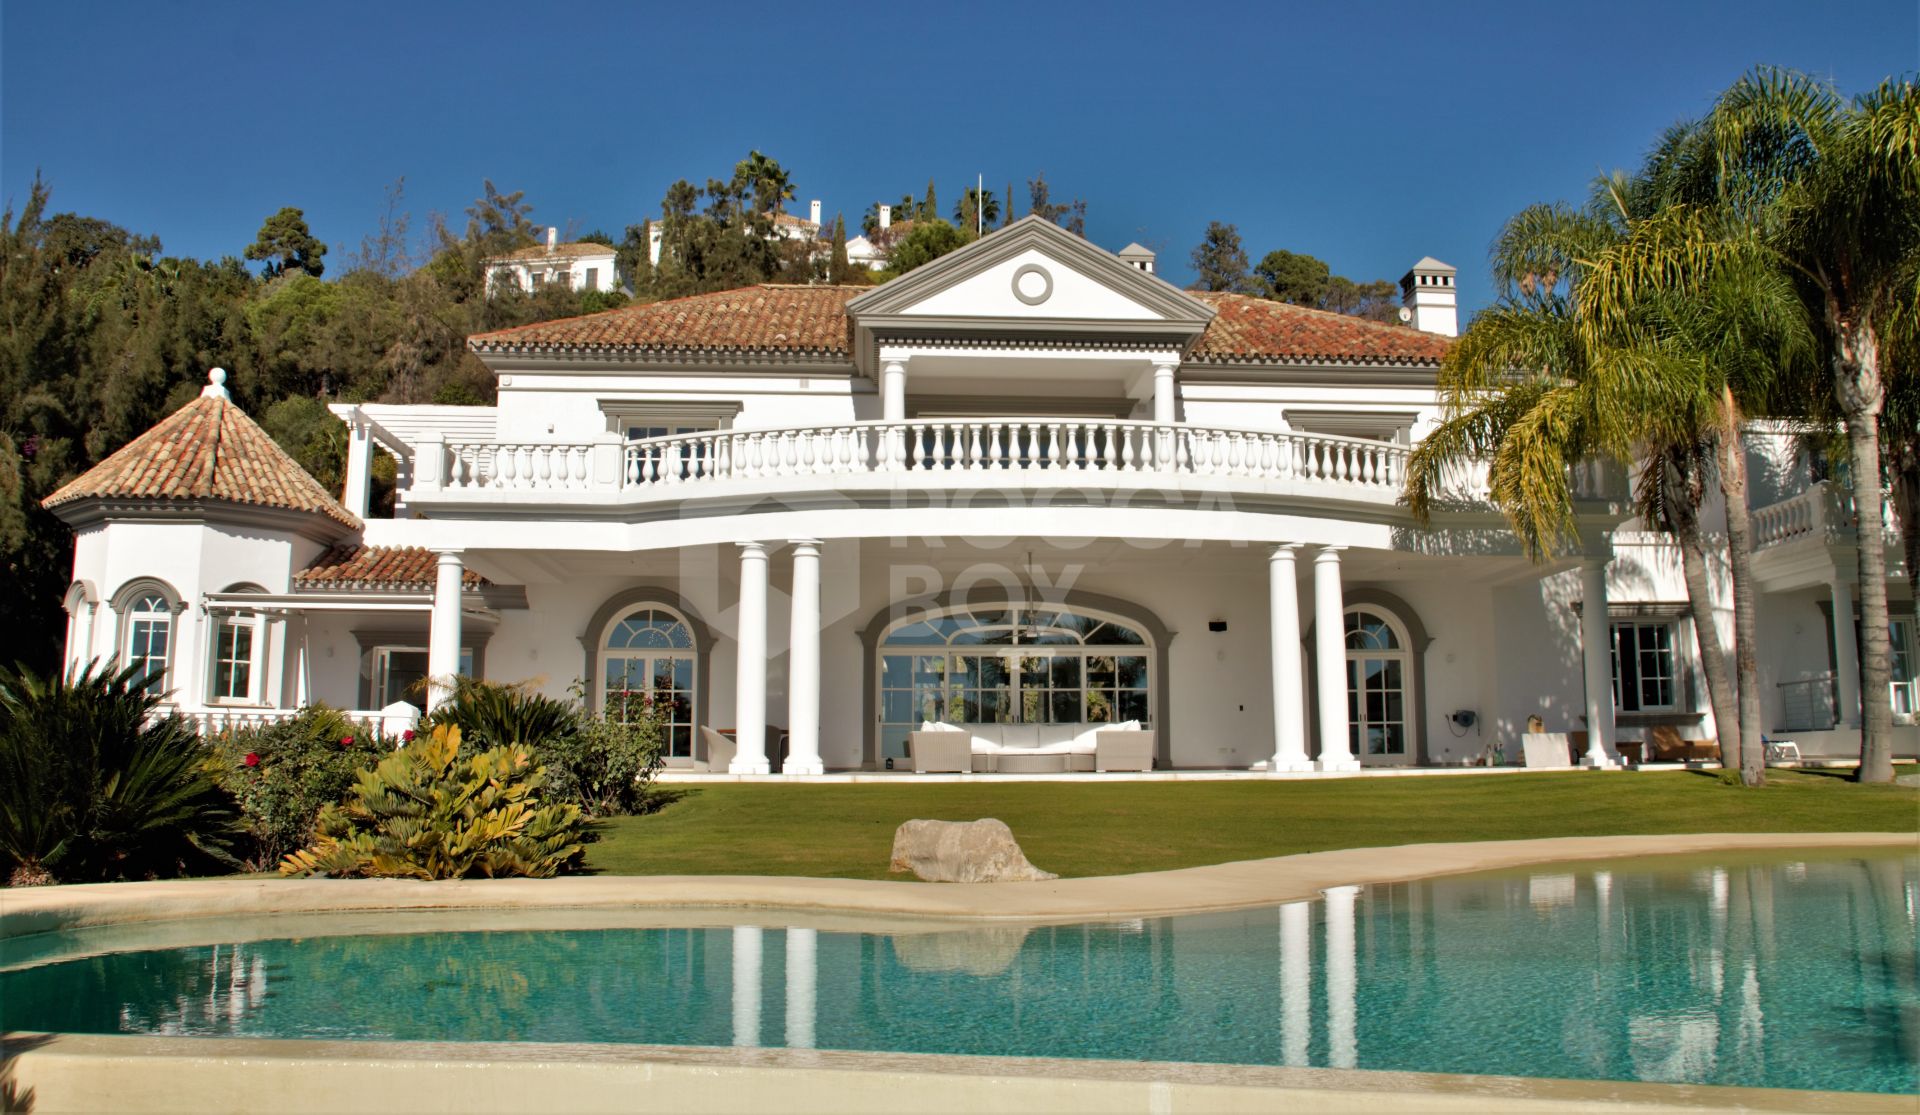 Unparalleled Beauty, Class, and Location - Discover the Ultimate Luxury Estate